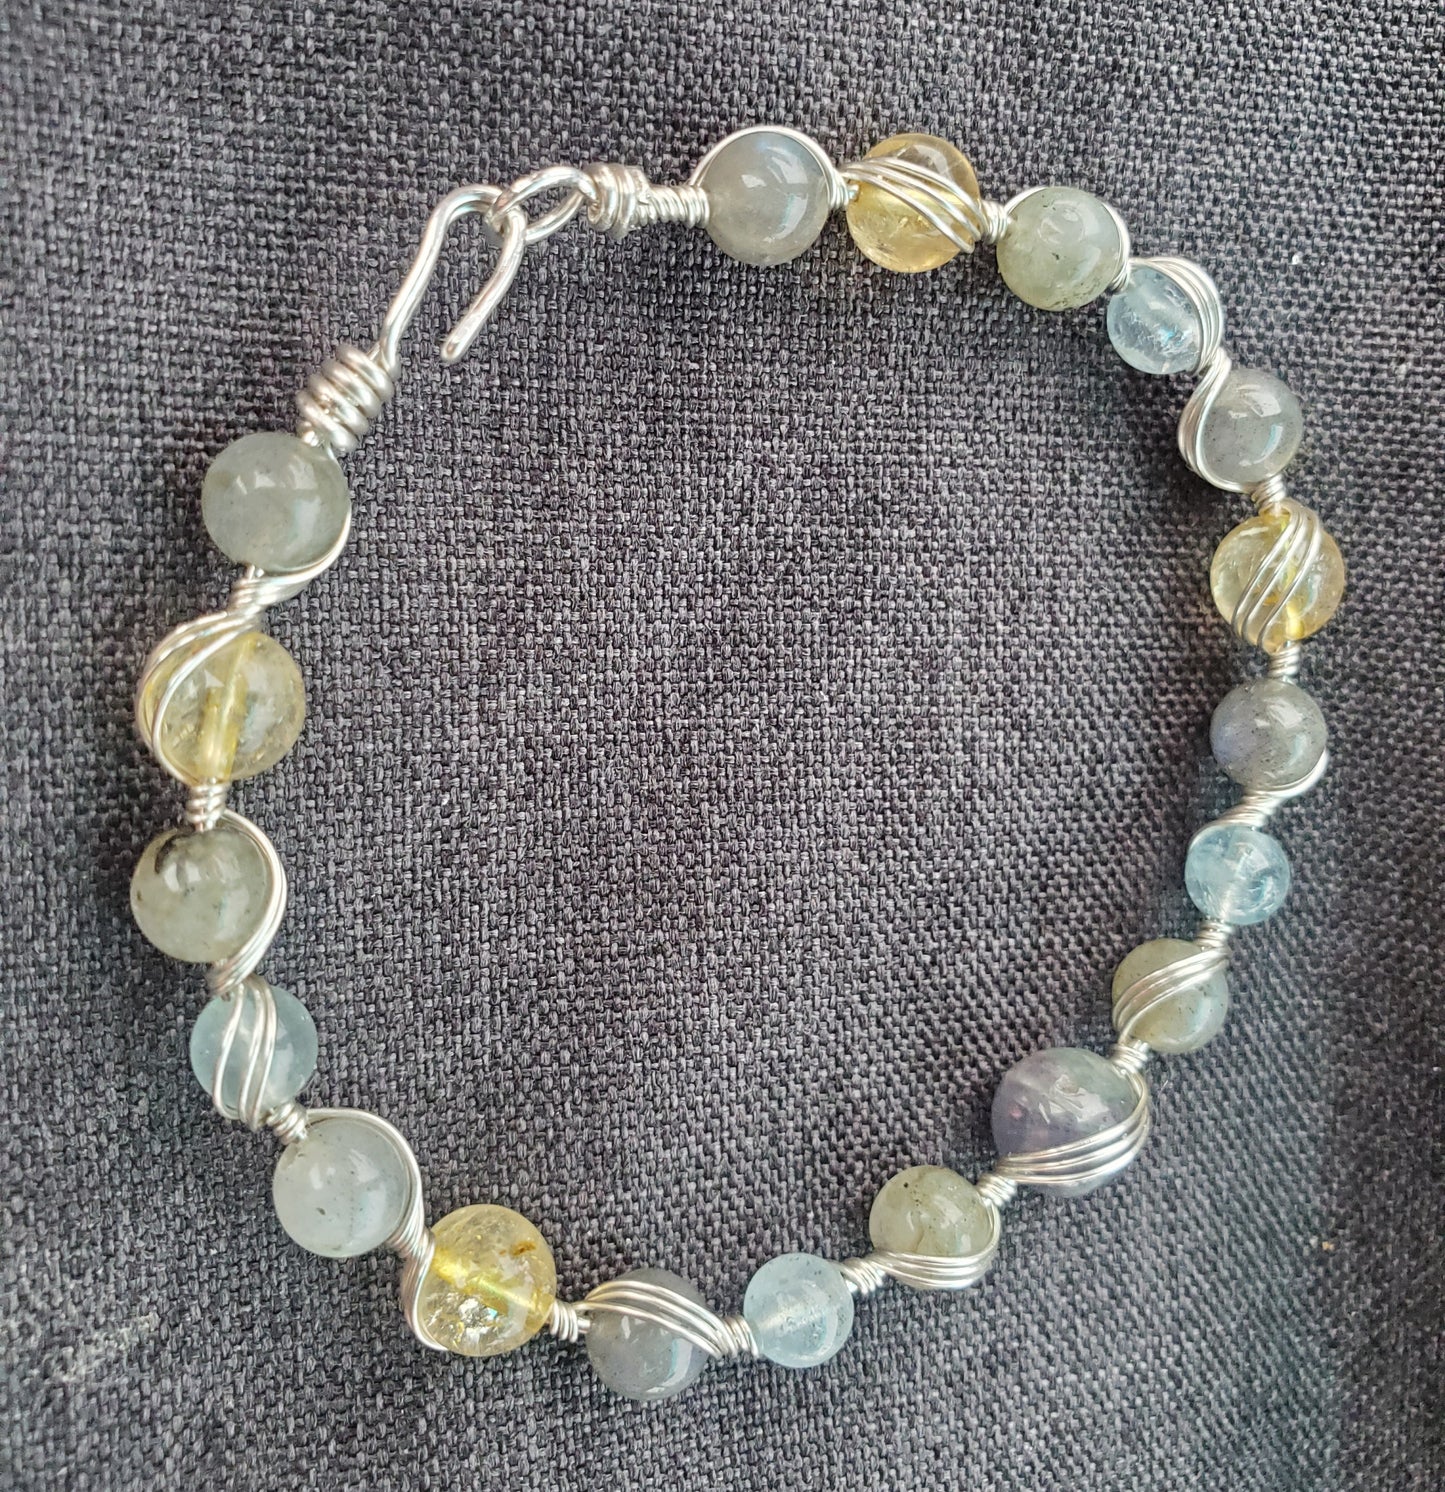 Sterling silver wire wrapped bracelet with tanzanite, aquamarine, citrine, and labradorite